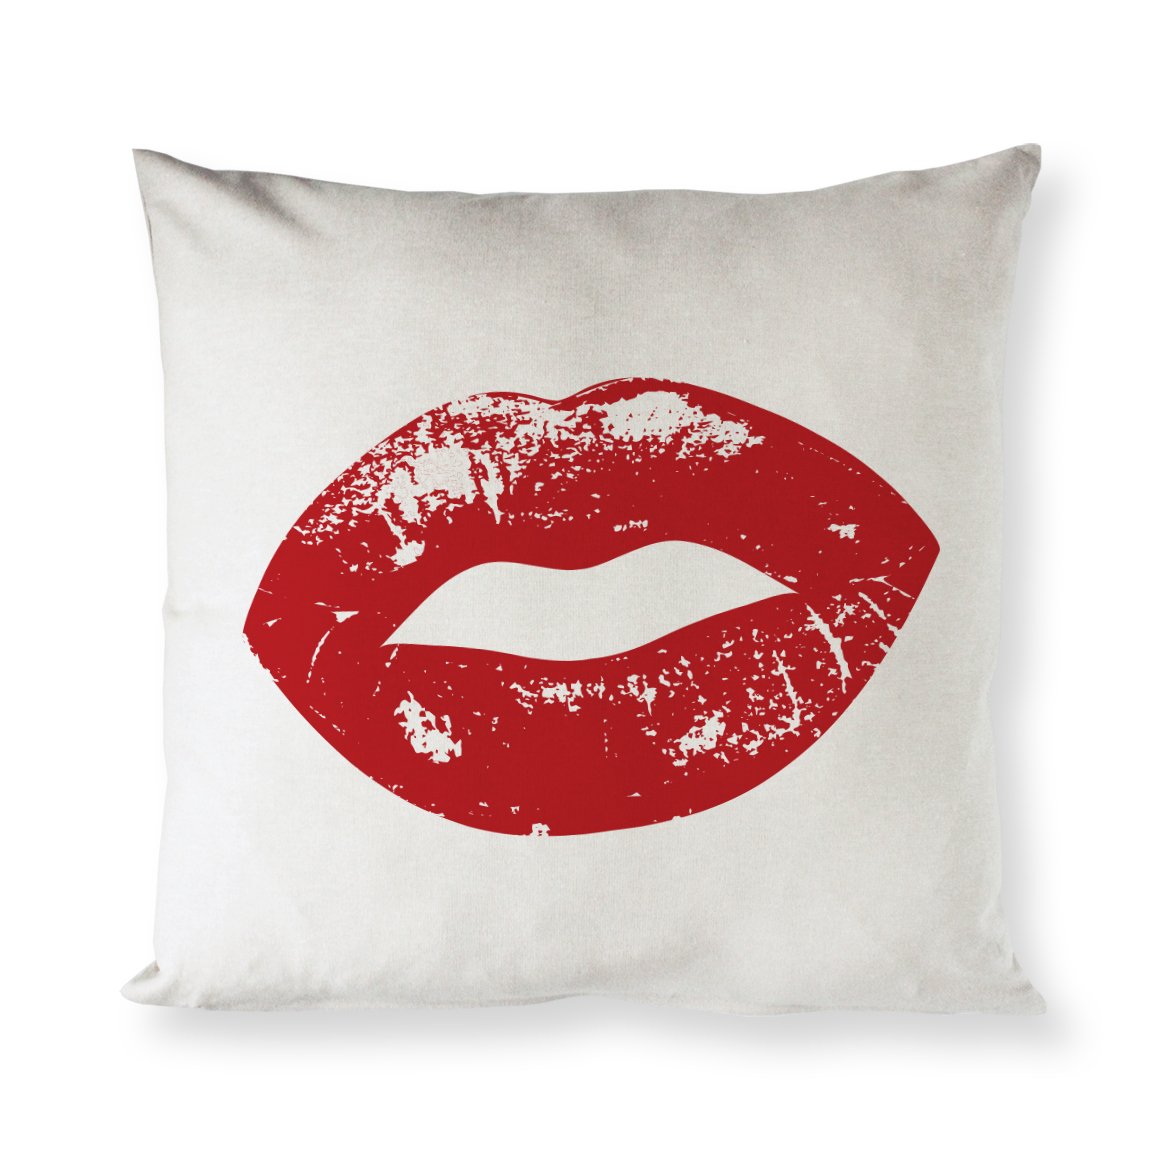 Kiss Me Pillow Cover